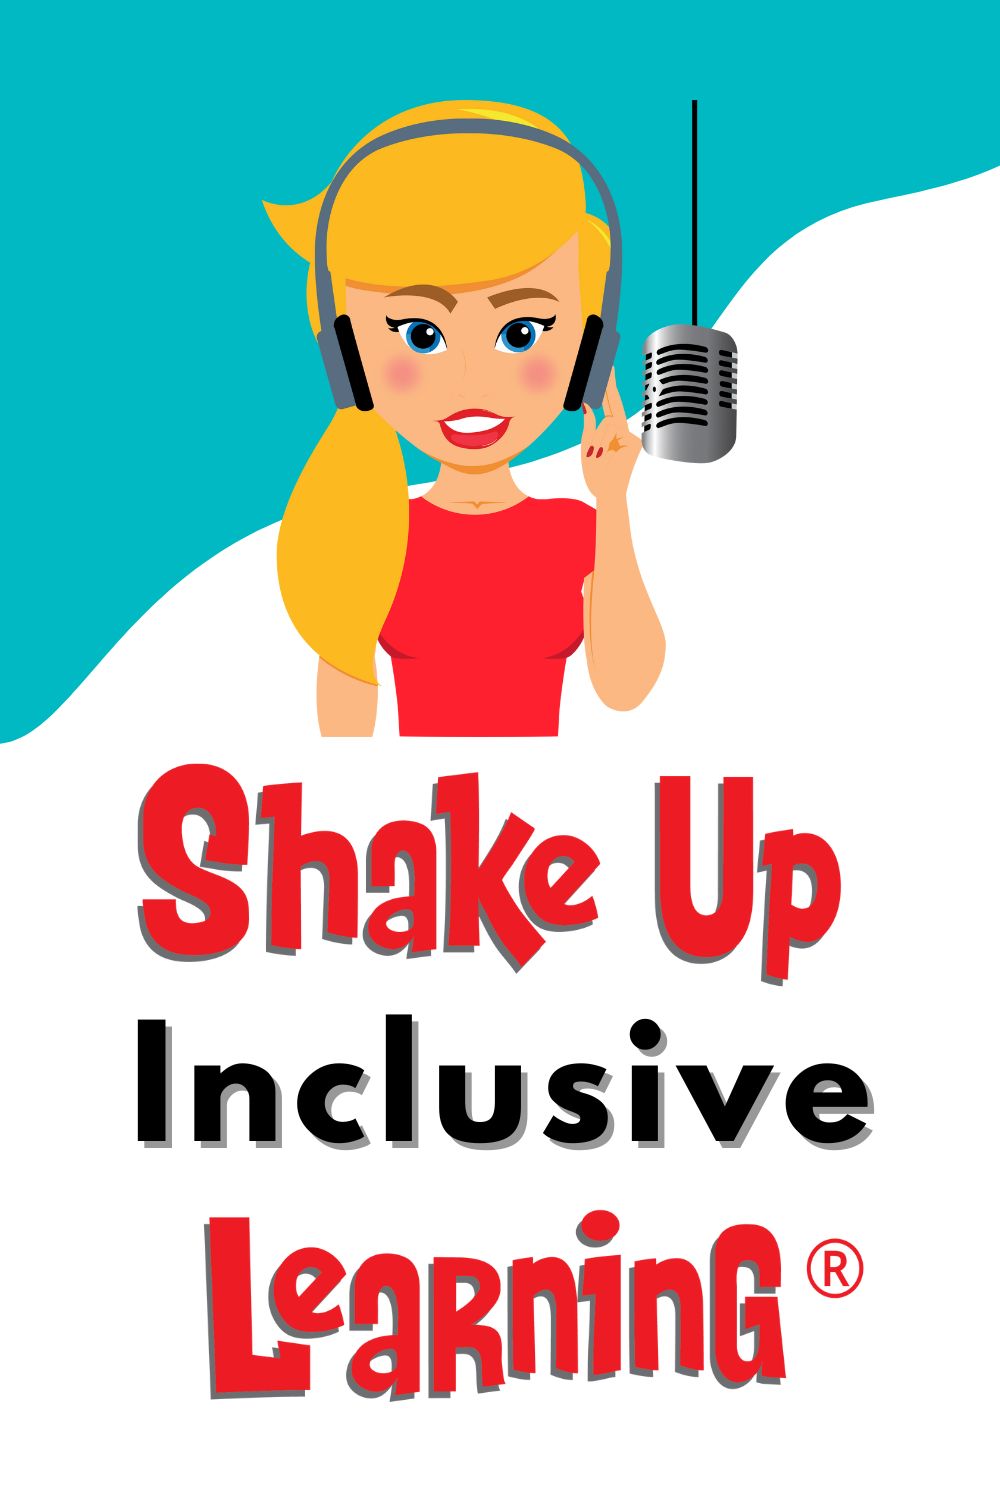 Fighting Exclusion: Shake Up Inclusive Learning